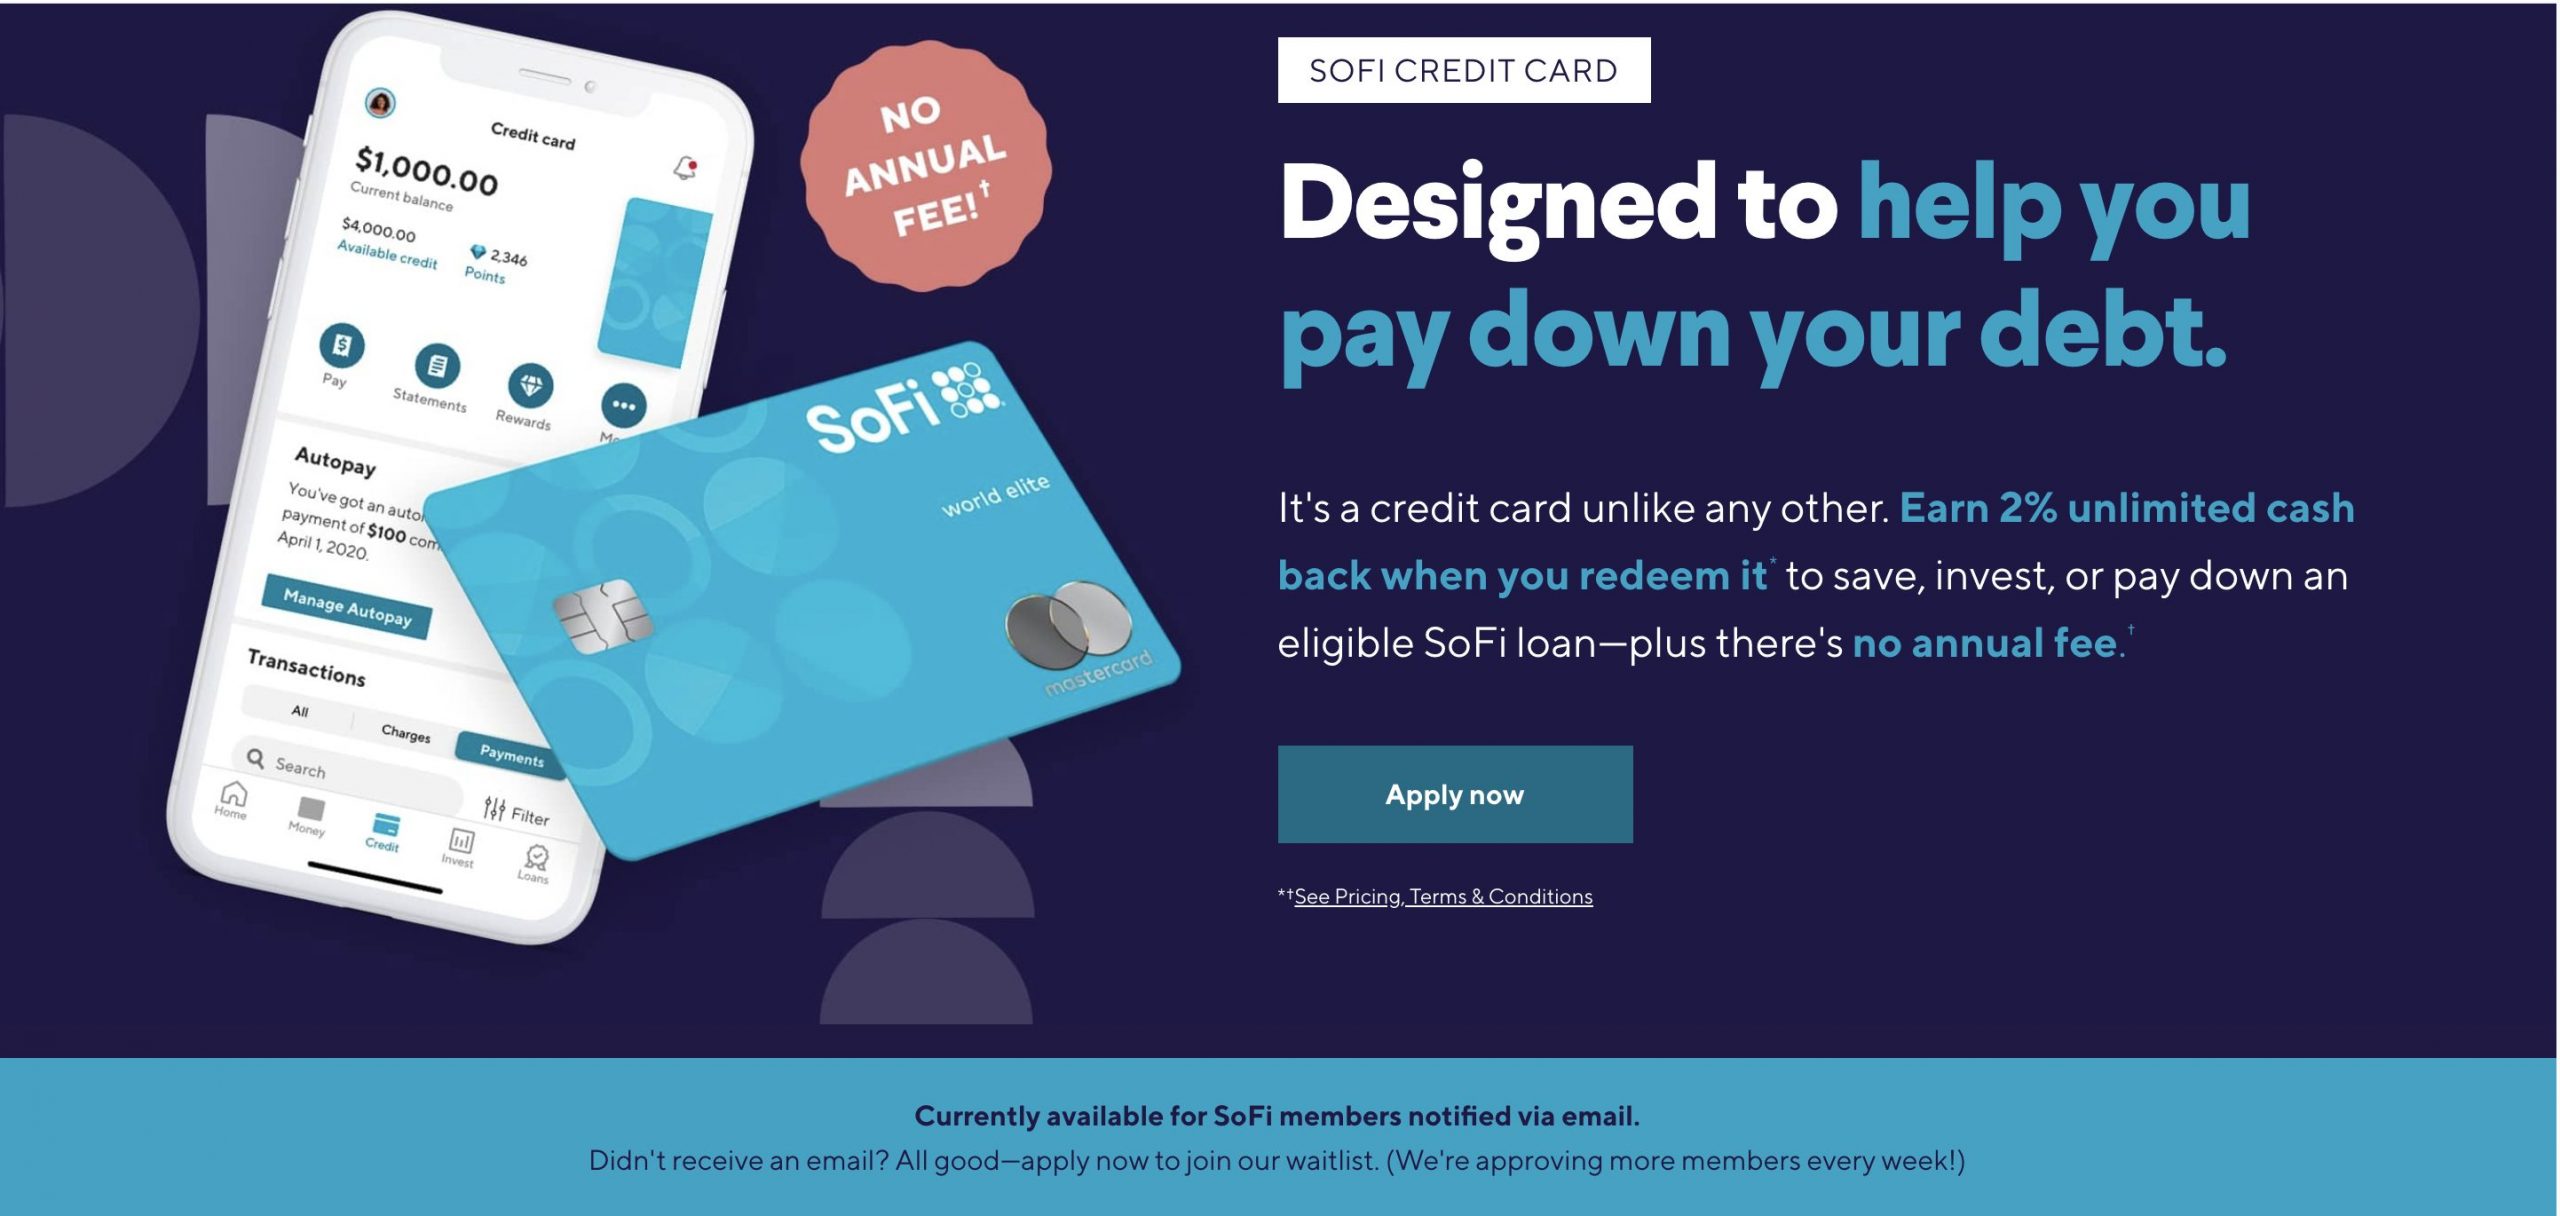 SoFi announces first credit card that can help people pay down debt